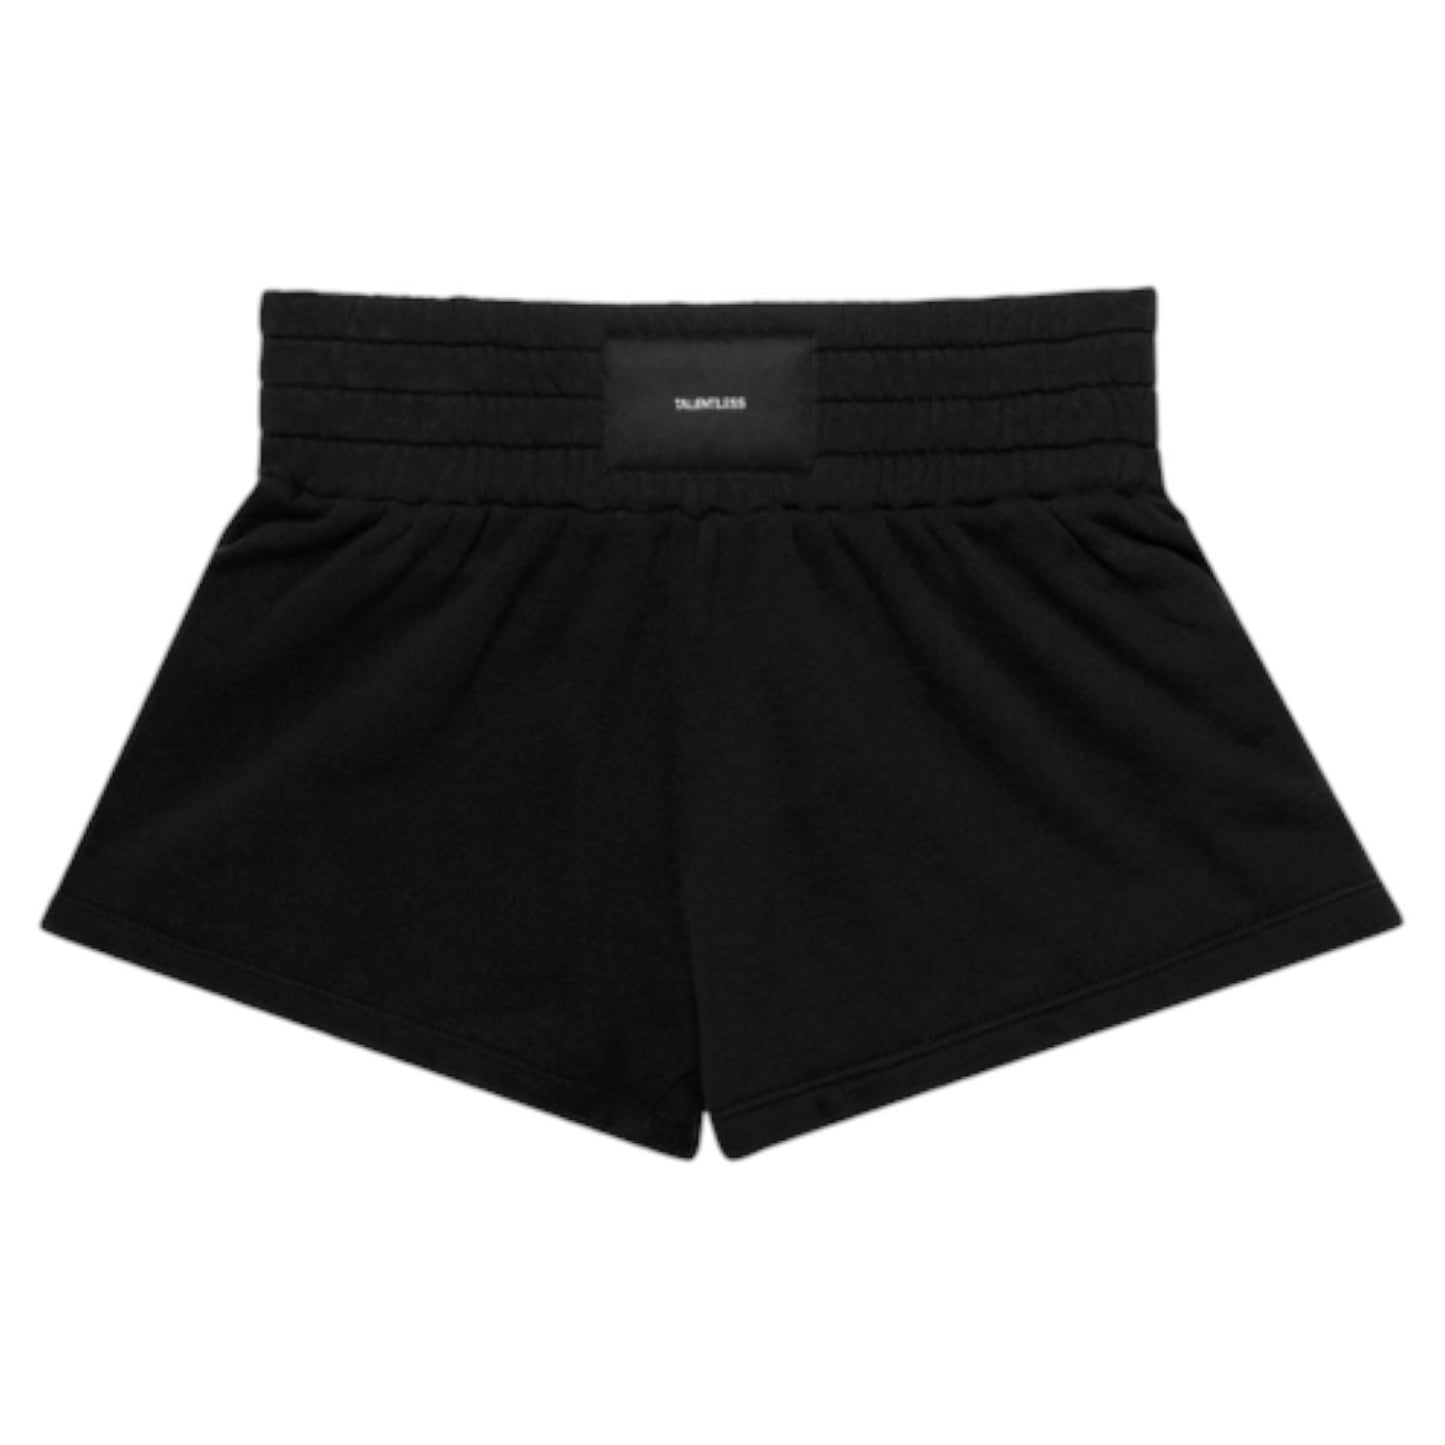 Talentless Womens Boxing Shorts in Black